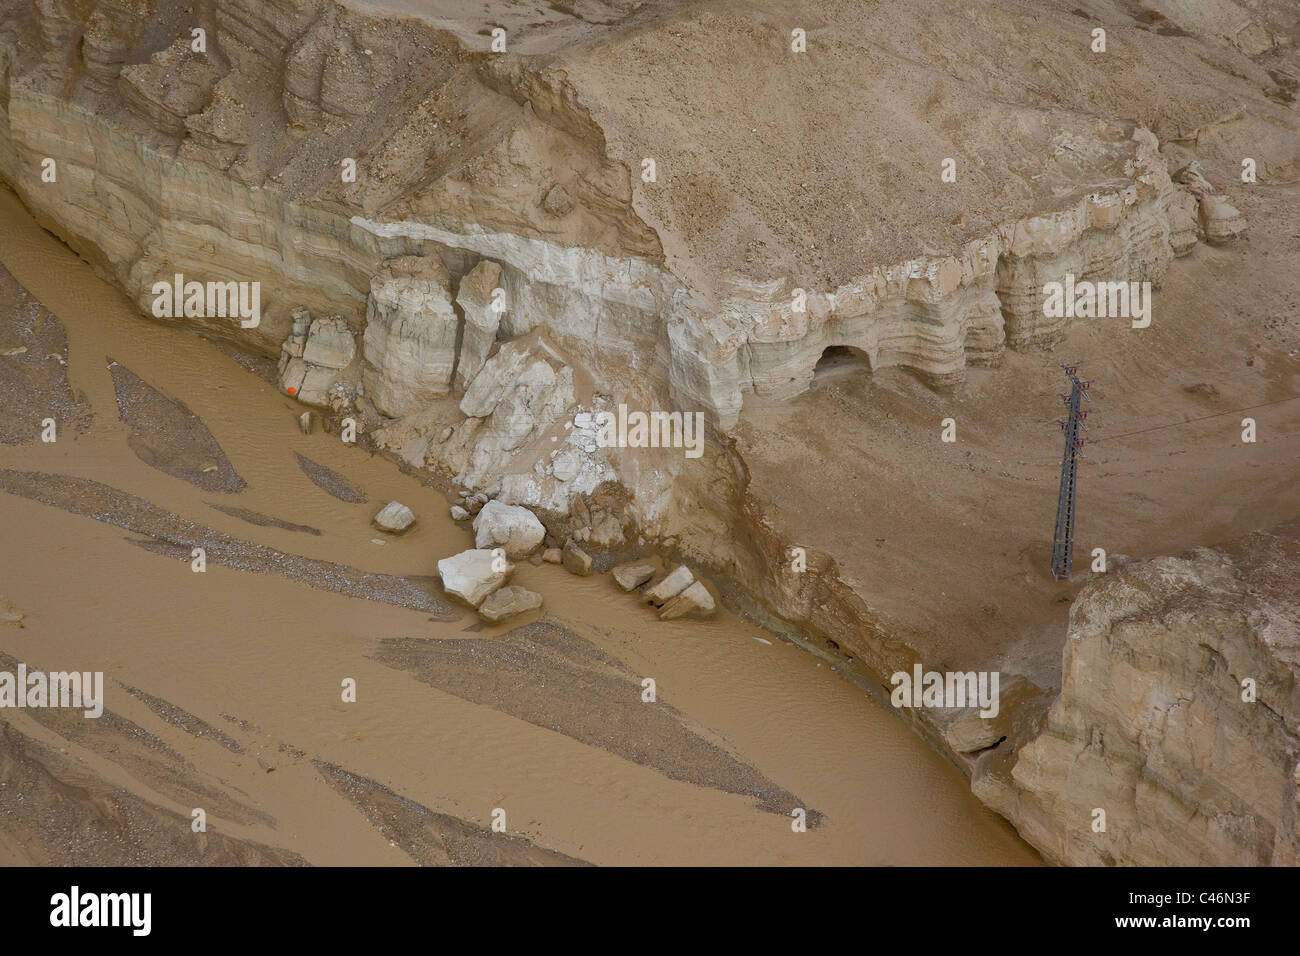 Aerial photograph of the landscape of the Judean desert after a flood Stock Photo